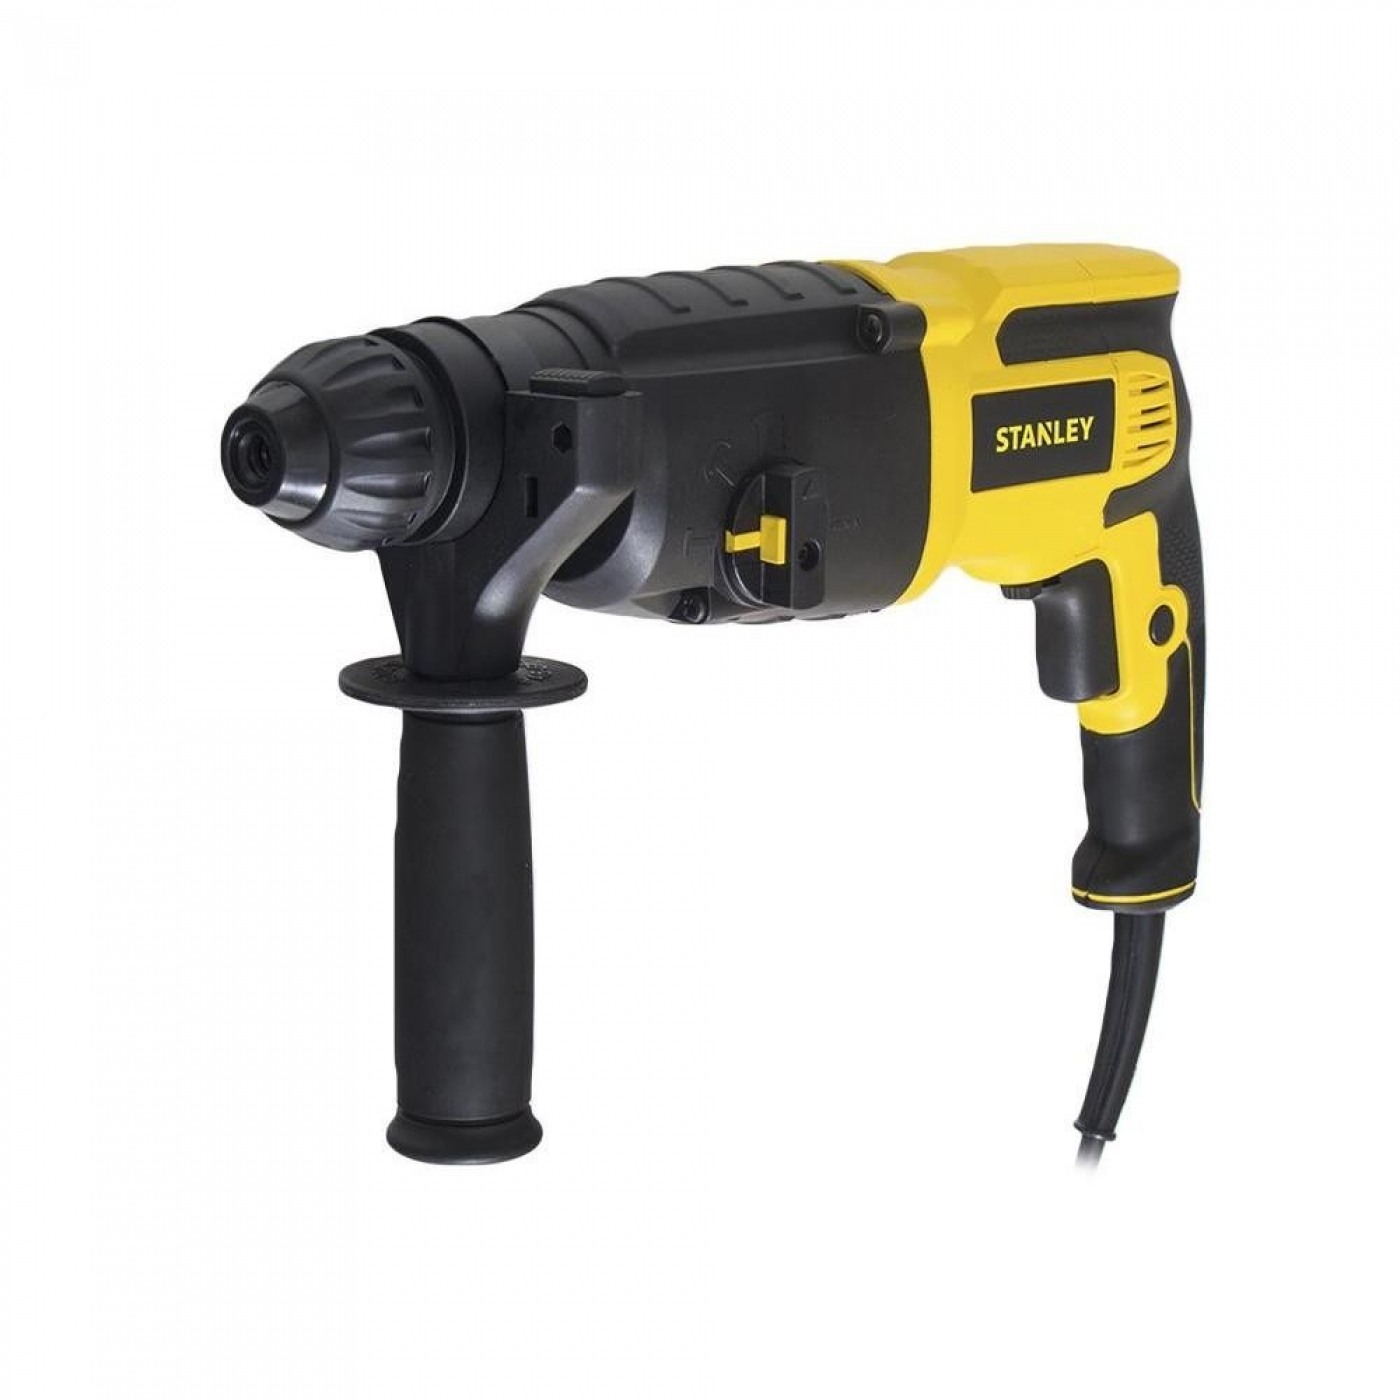 Stanley 26mm 3 Mode Rotary Hammer Drill and Kitbox (800W)